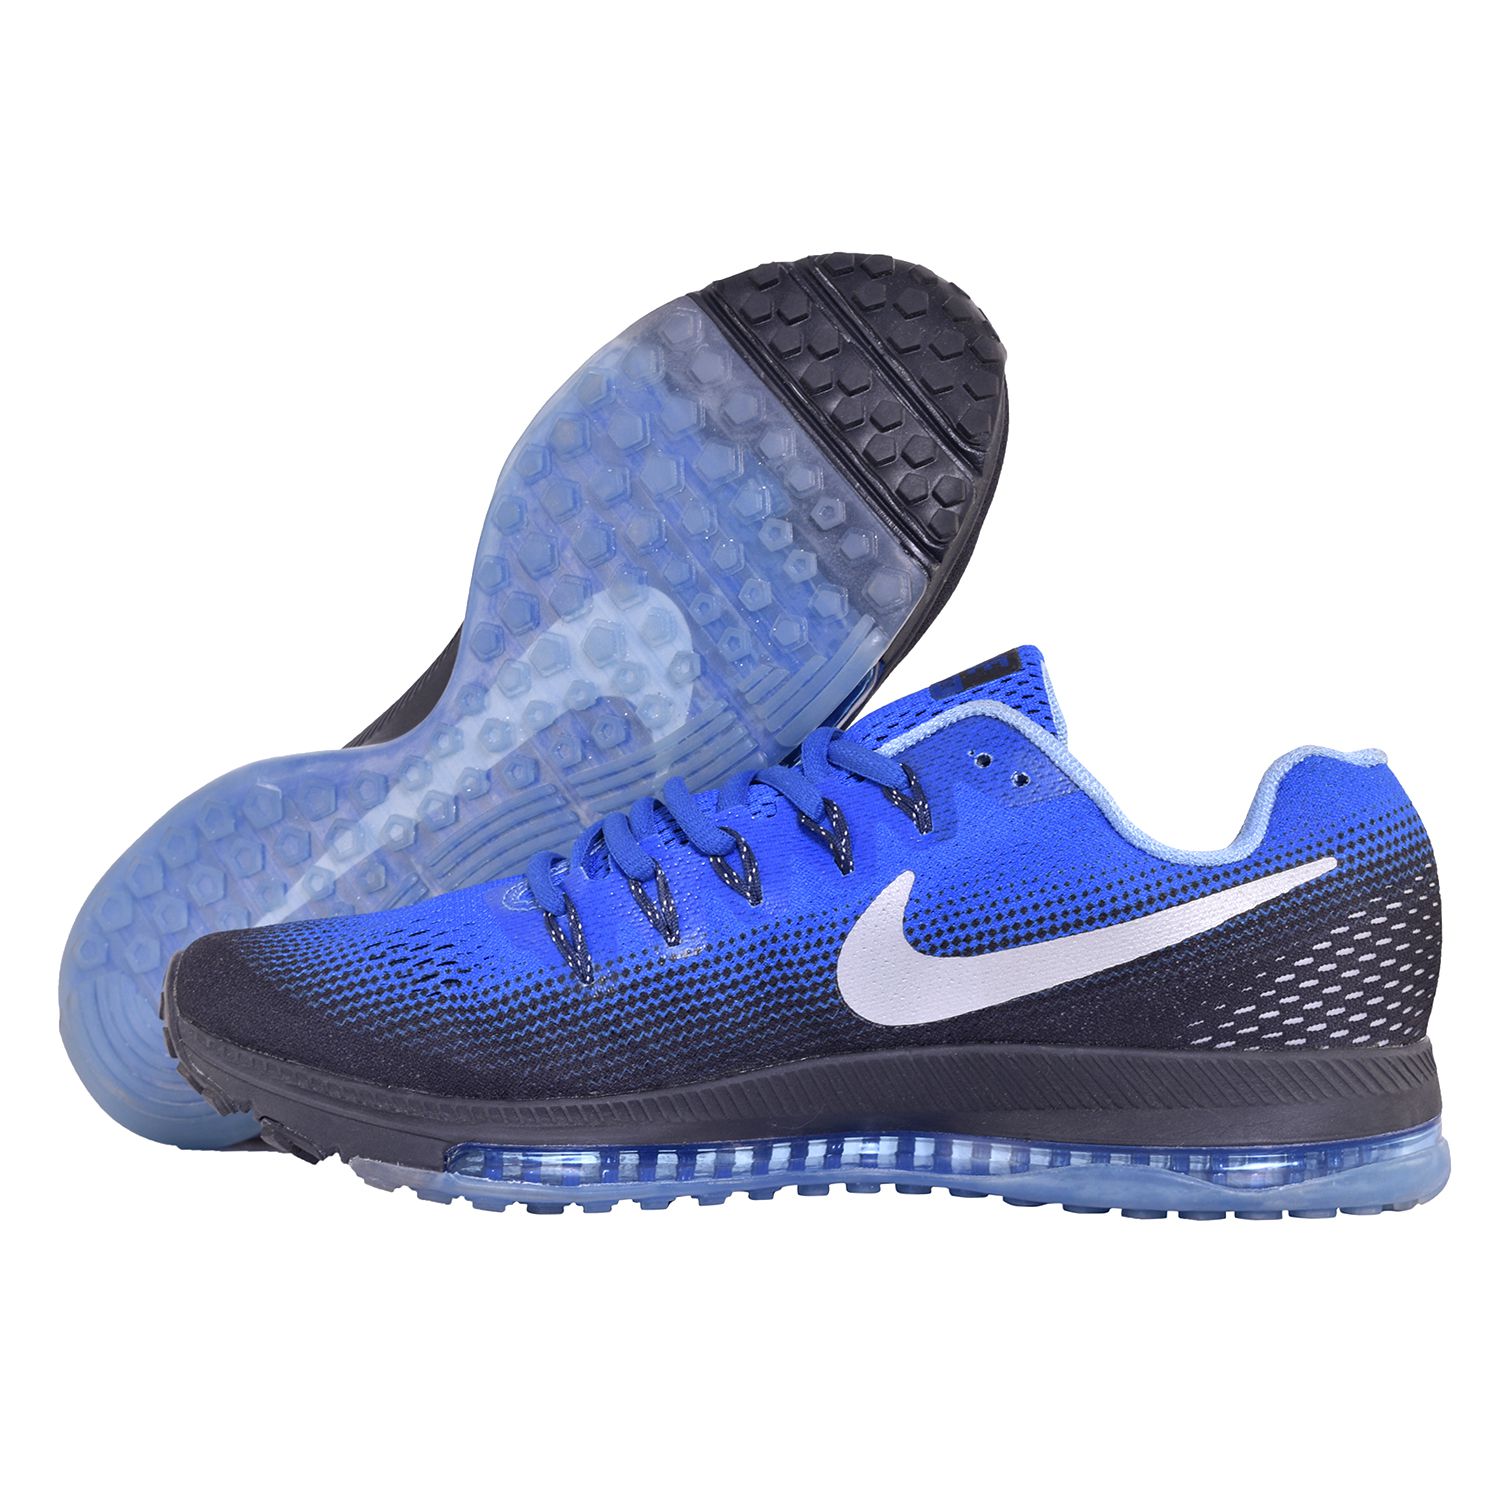 nike zoom shoes price